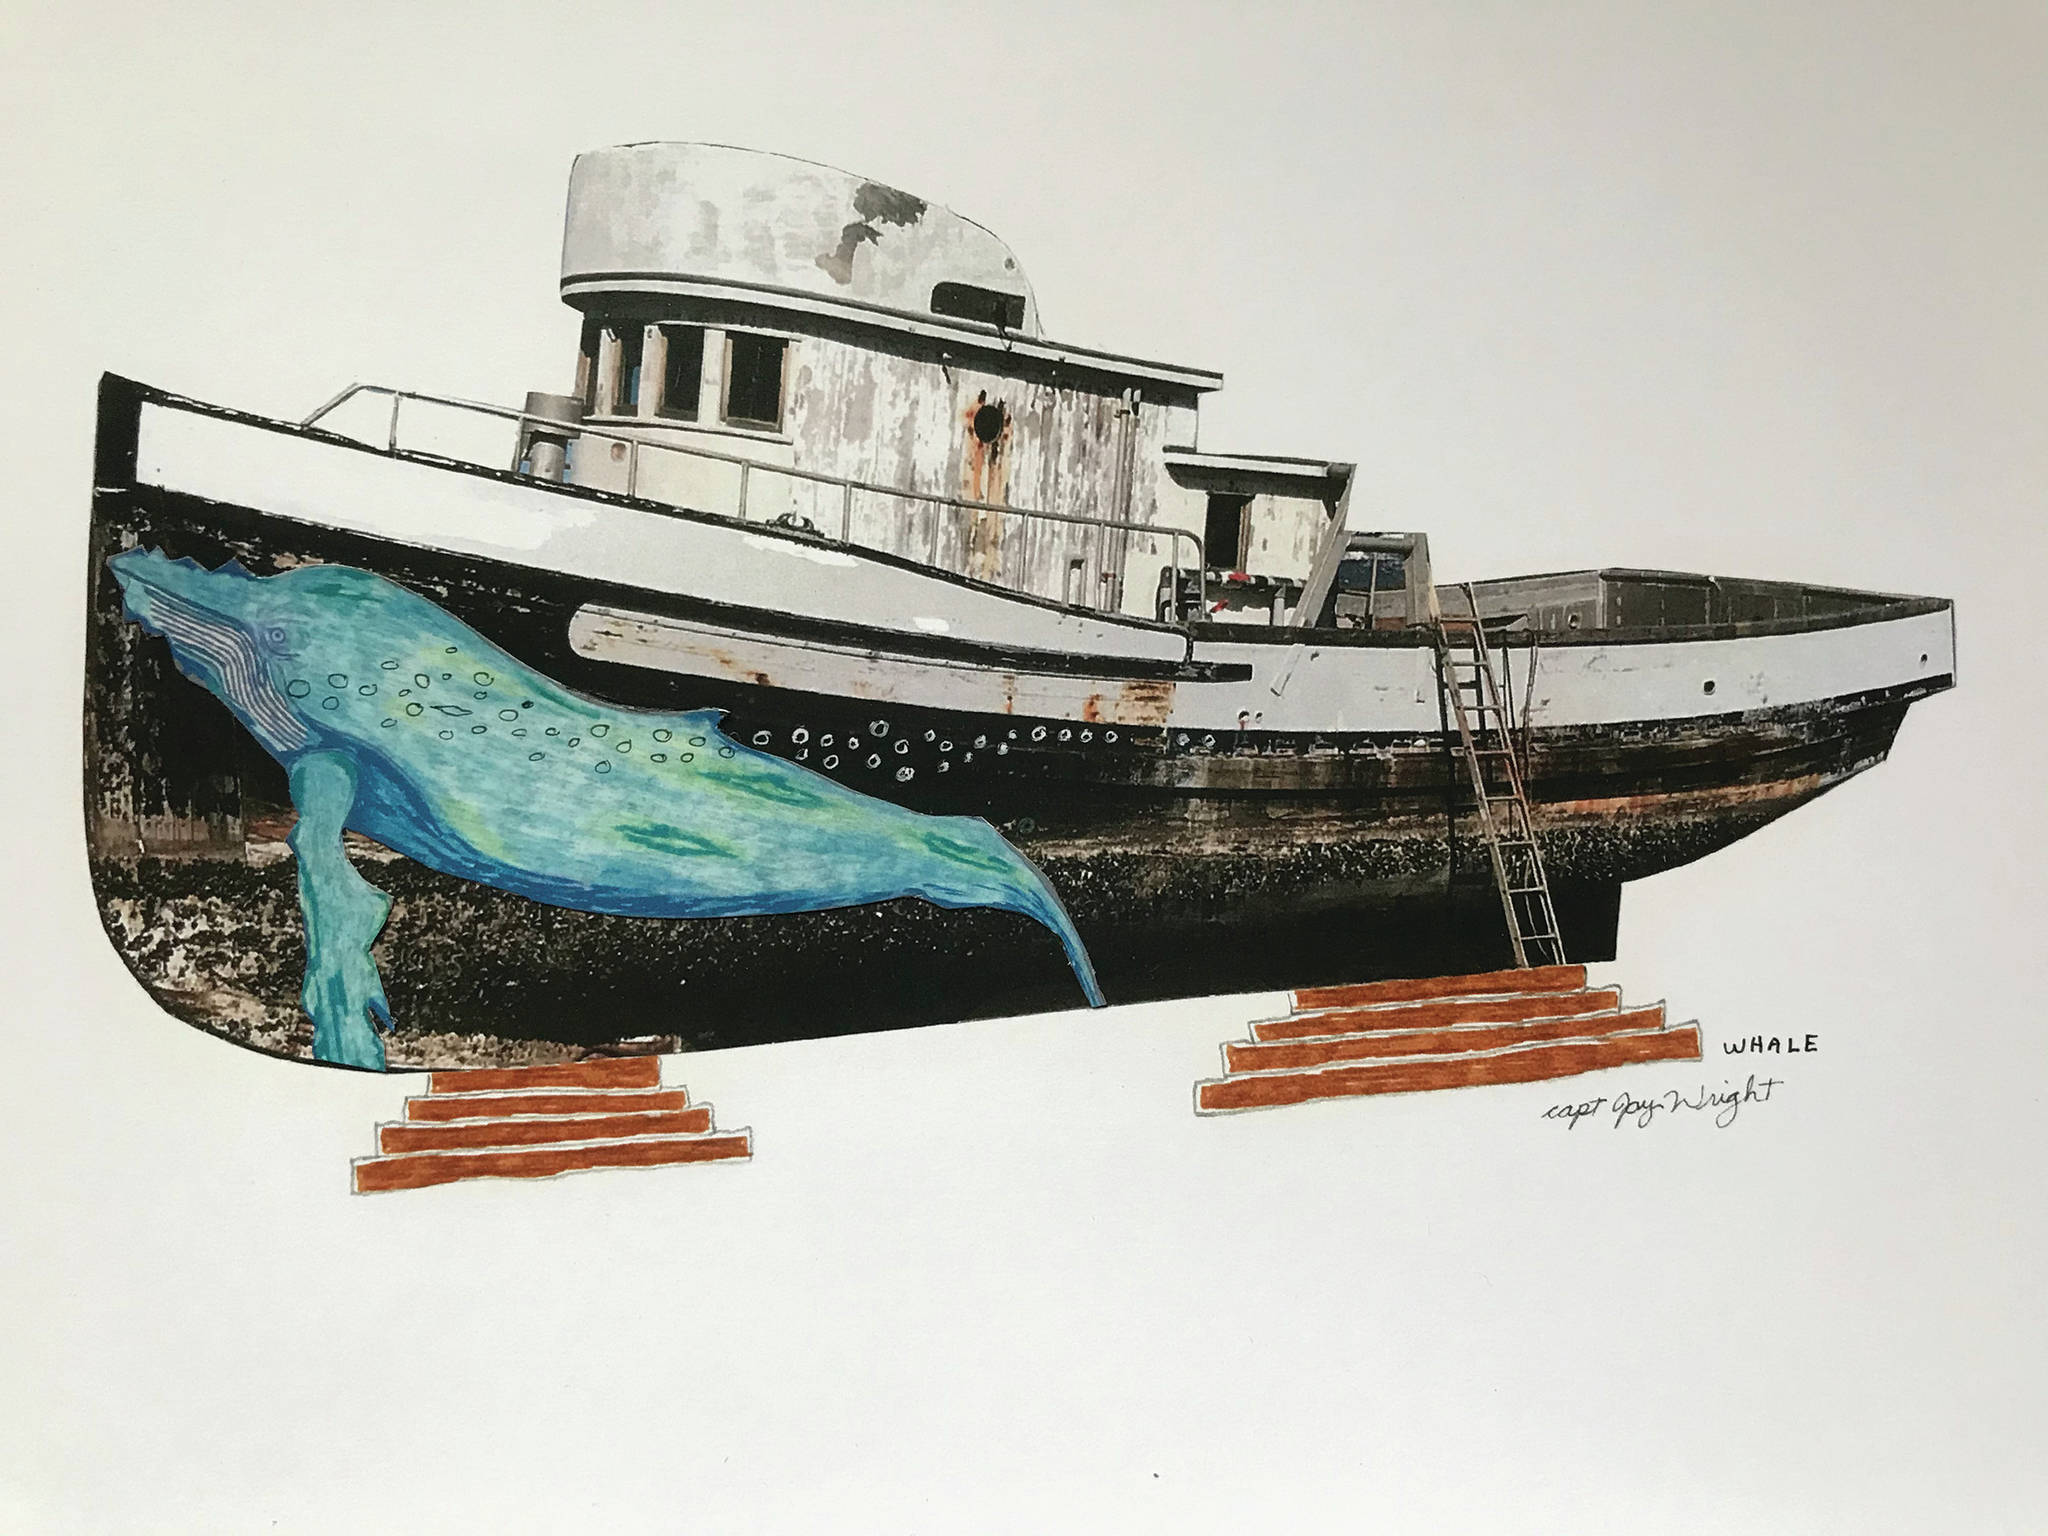 Jay Wright’s “Whale” is part of his exhibit opening Friday, Nov. 6, 2020, at Grace Ridge Brewery in Homer, Alaska. (Photo courtesy of Grace Ridge Brewery)